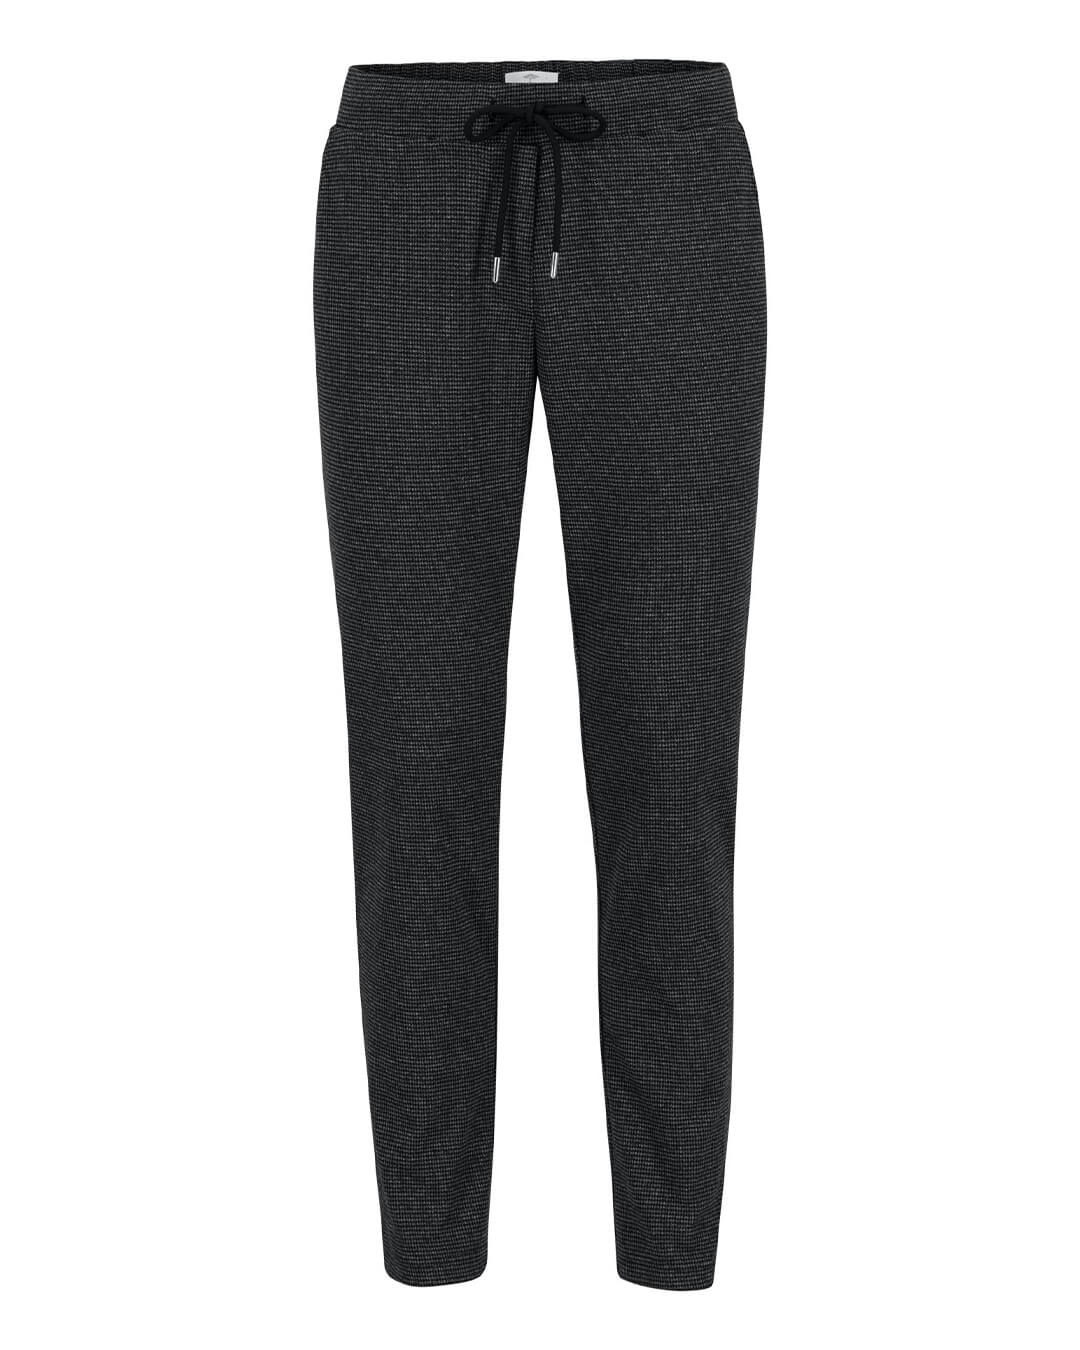 Fynch-Hatton Trousers Fynch-Hatton Black Houndstooth Joggers